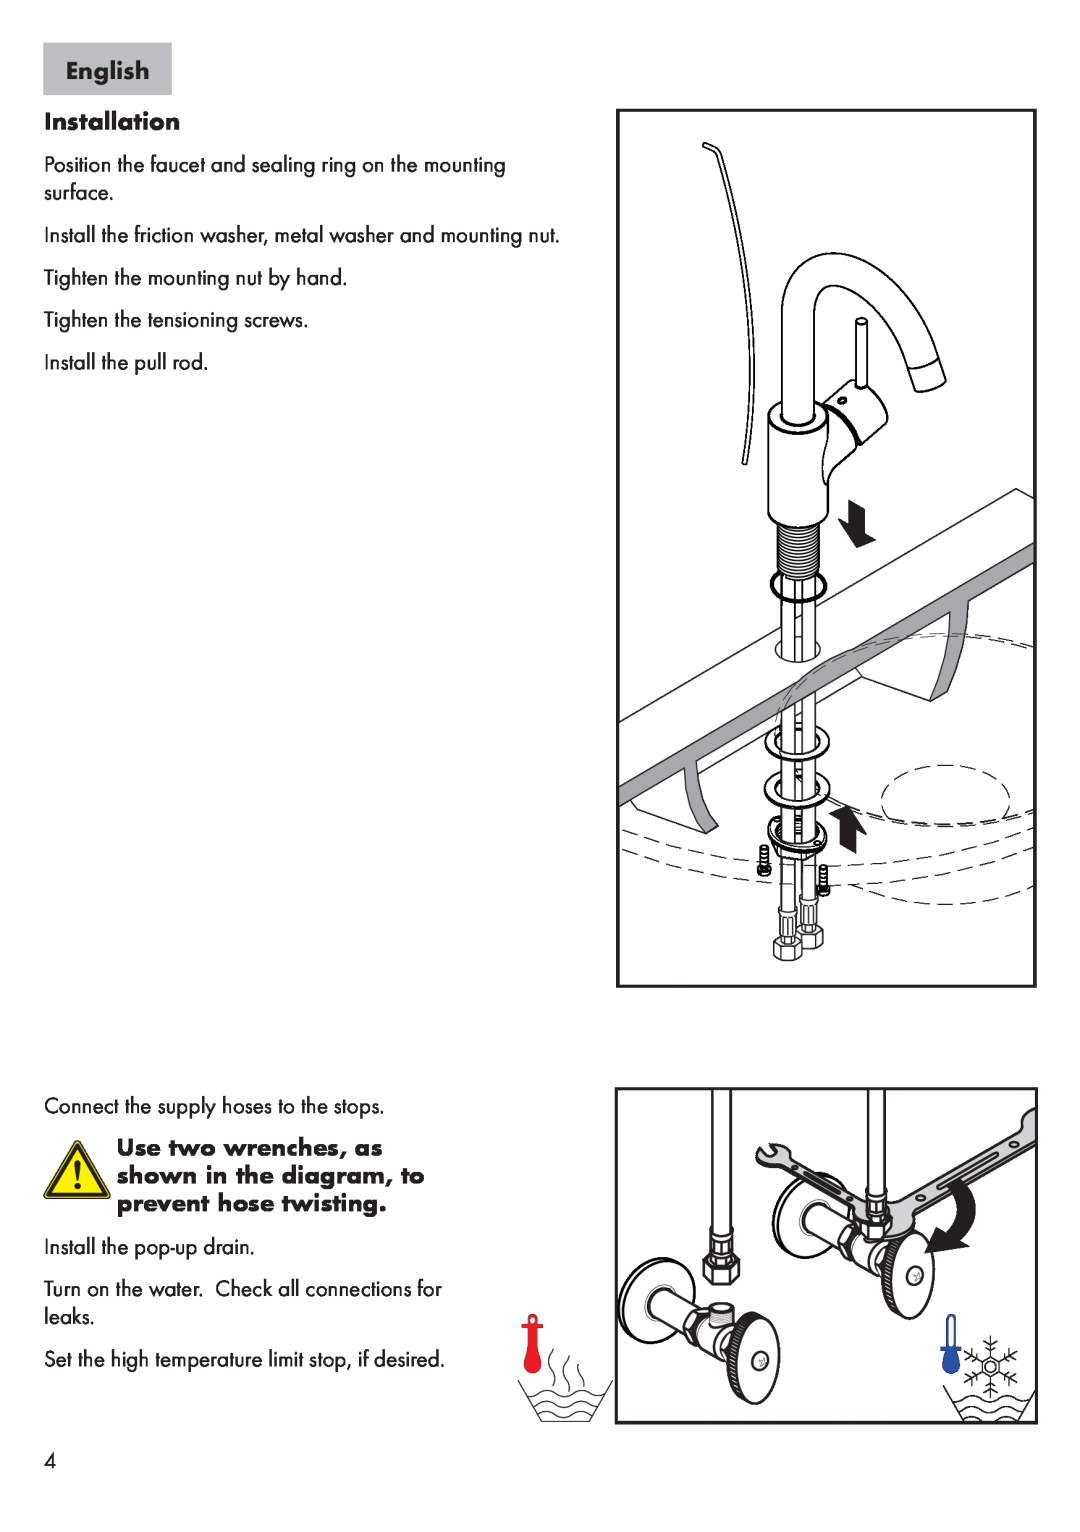 Axor 32070XX1, 32073XX1 English Installation, Use two wrenches, as shown in the diagram, to prevent hose twisting 